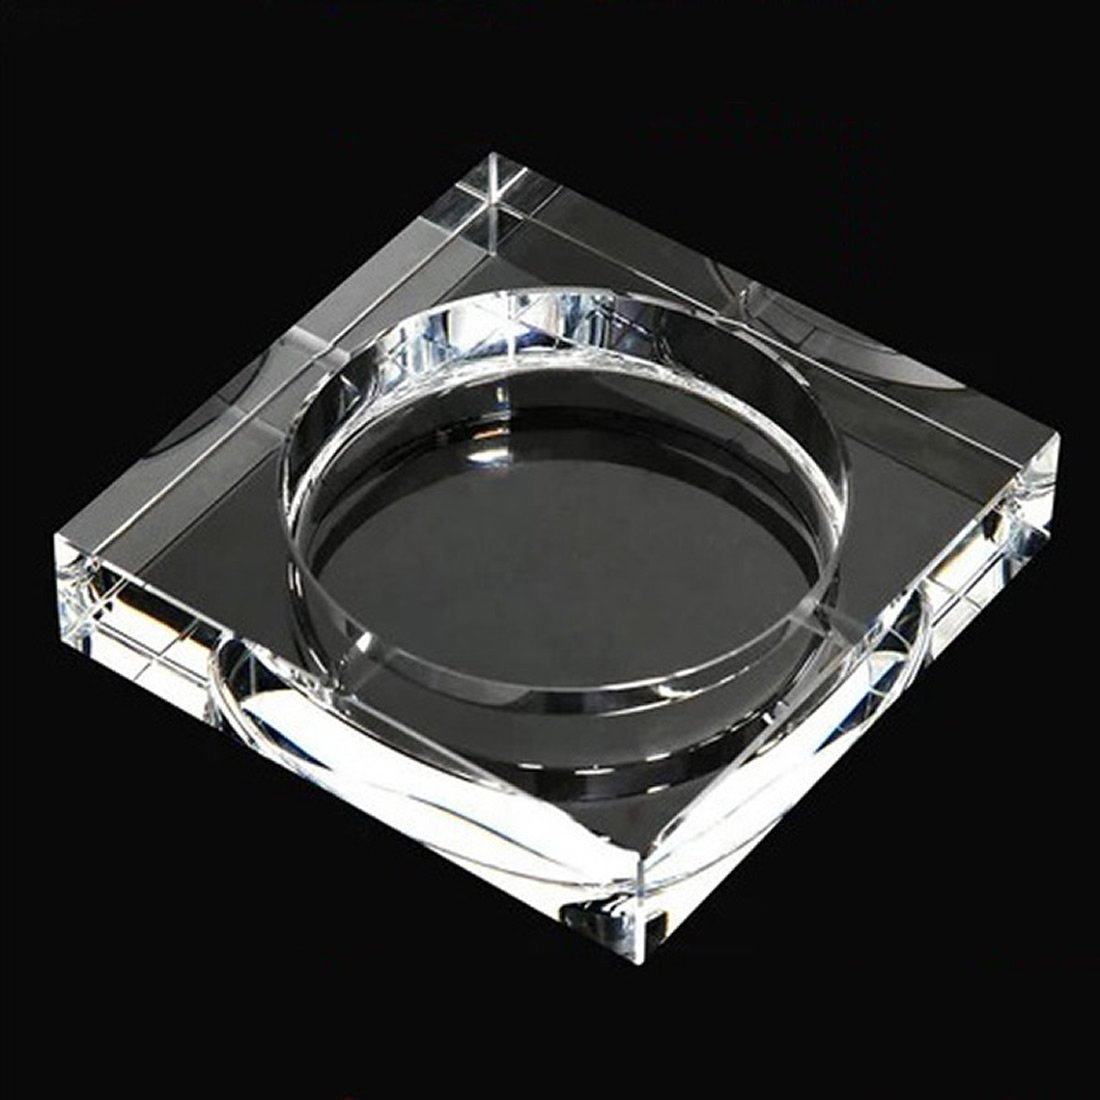 Amlong Crystal Large Square Crystal Ashtray with Gift Box, 6 x 6 inch (150mm X150mm), Clear